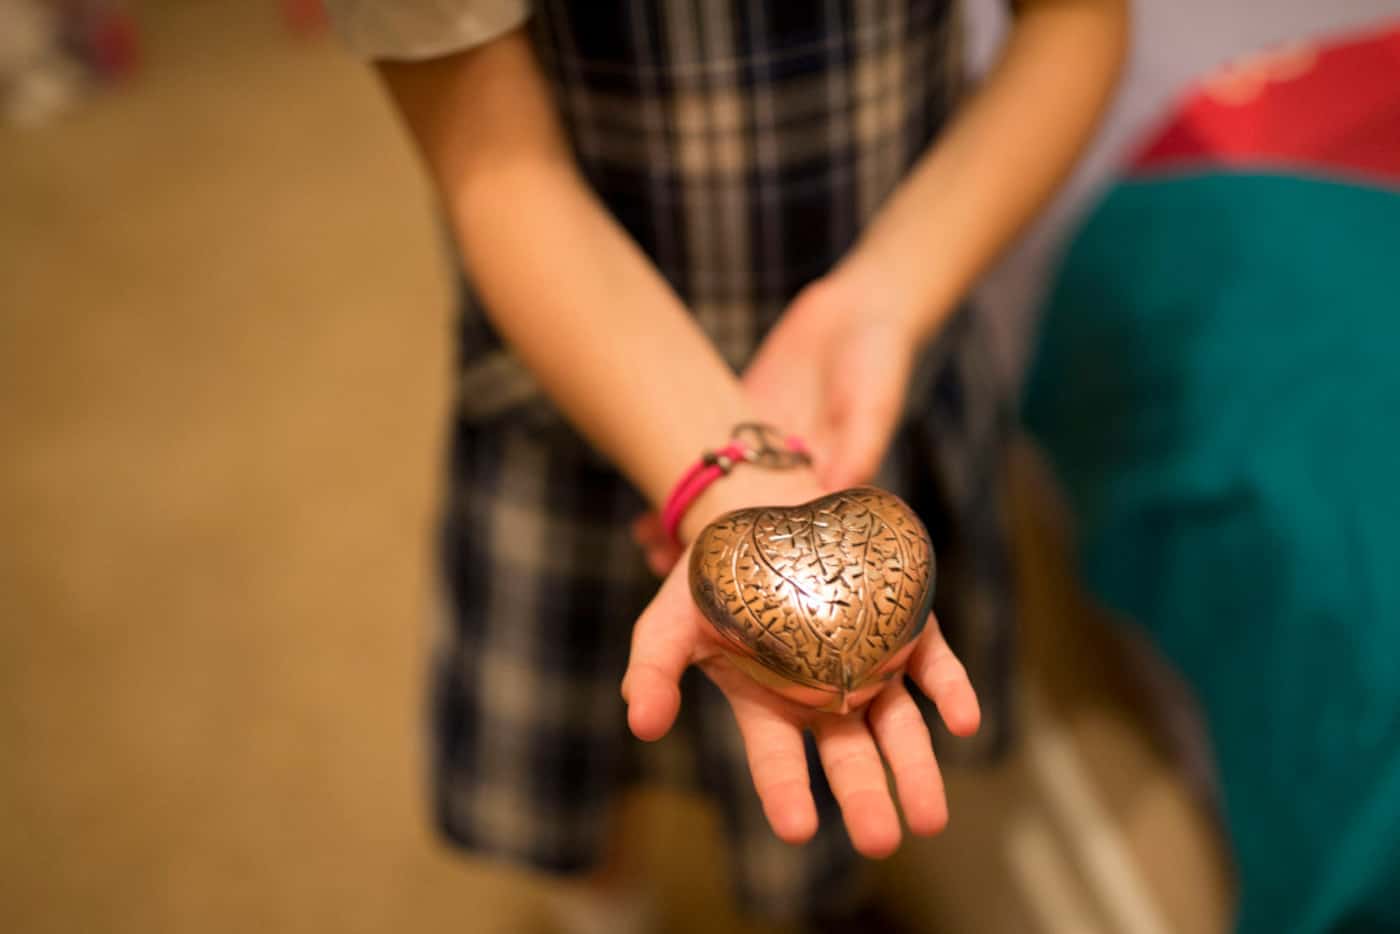 Lily Howard, 8, holds an urn containing some of her sister Harper's ashes. (Ting Shen/Staff...